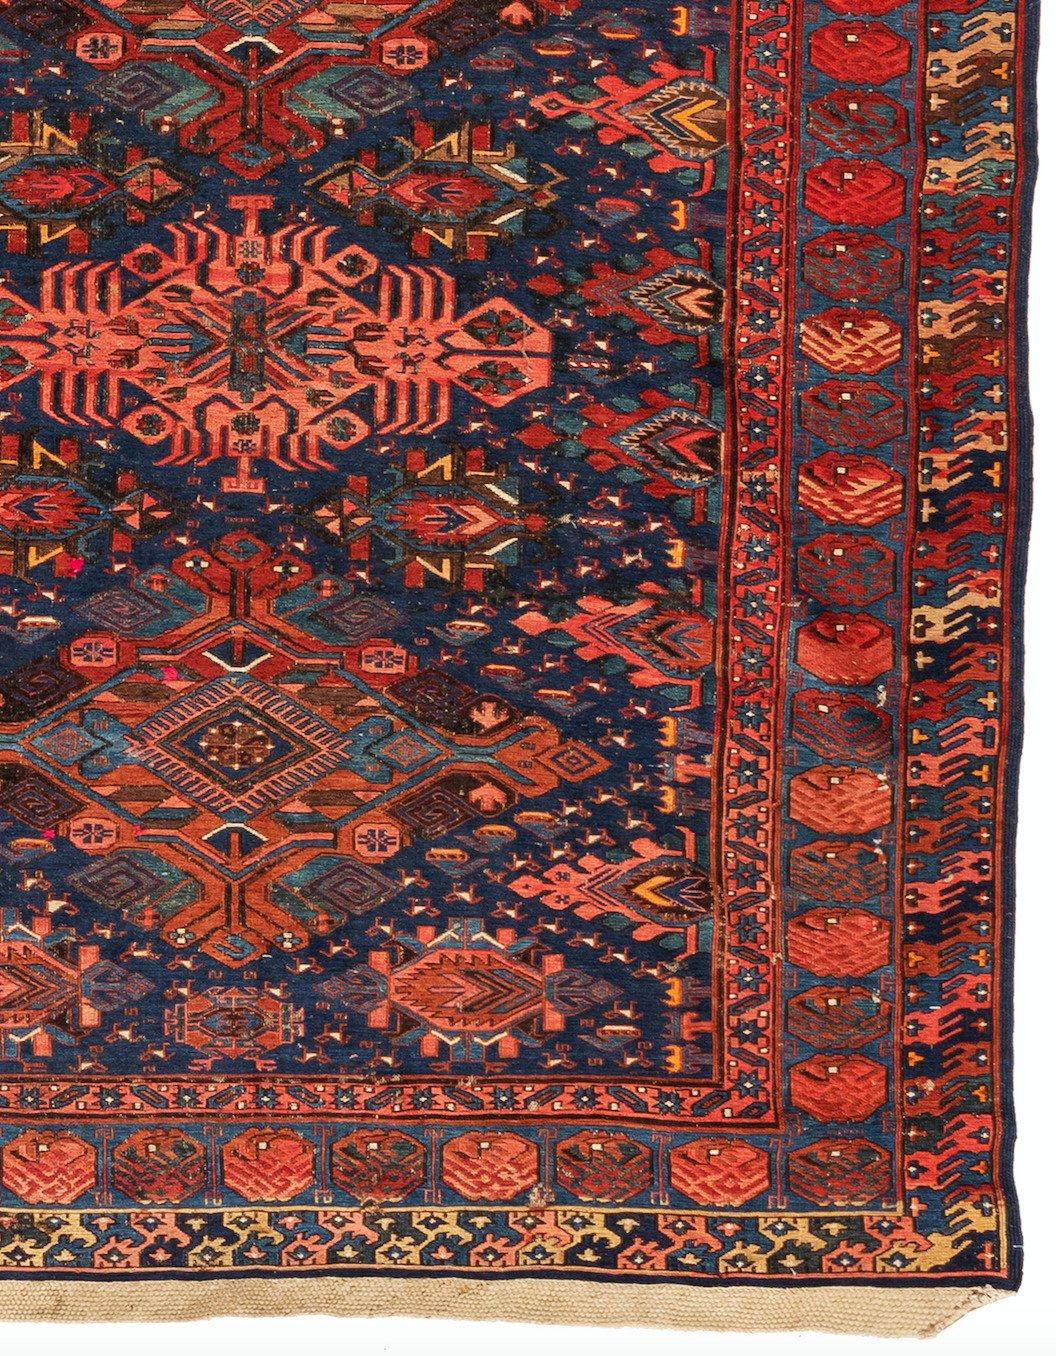 Hand-Woven Antique Red and Navy Blue Geometric Tribal Caucasian Soumak Rug For Sale